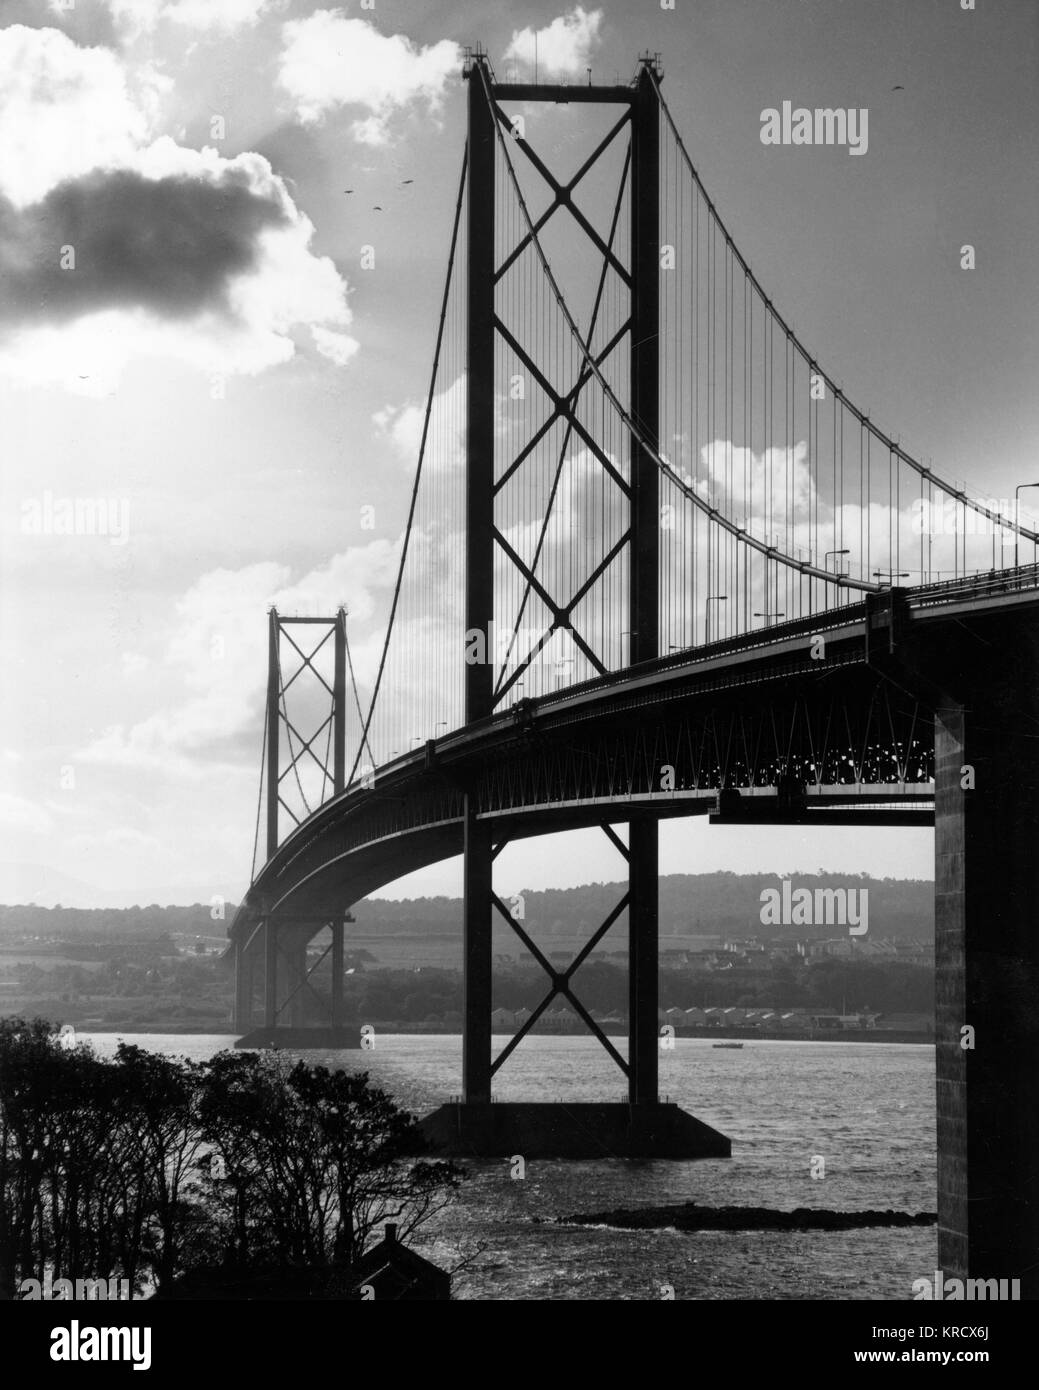 Construction on the Forth  Road Bridge began in 1958 and  was completed in 1964,  becoming the longest  suspension bridge at that  time.      Date: 1960s Stock Photo